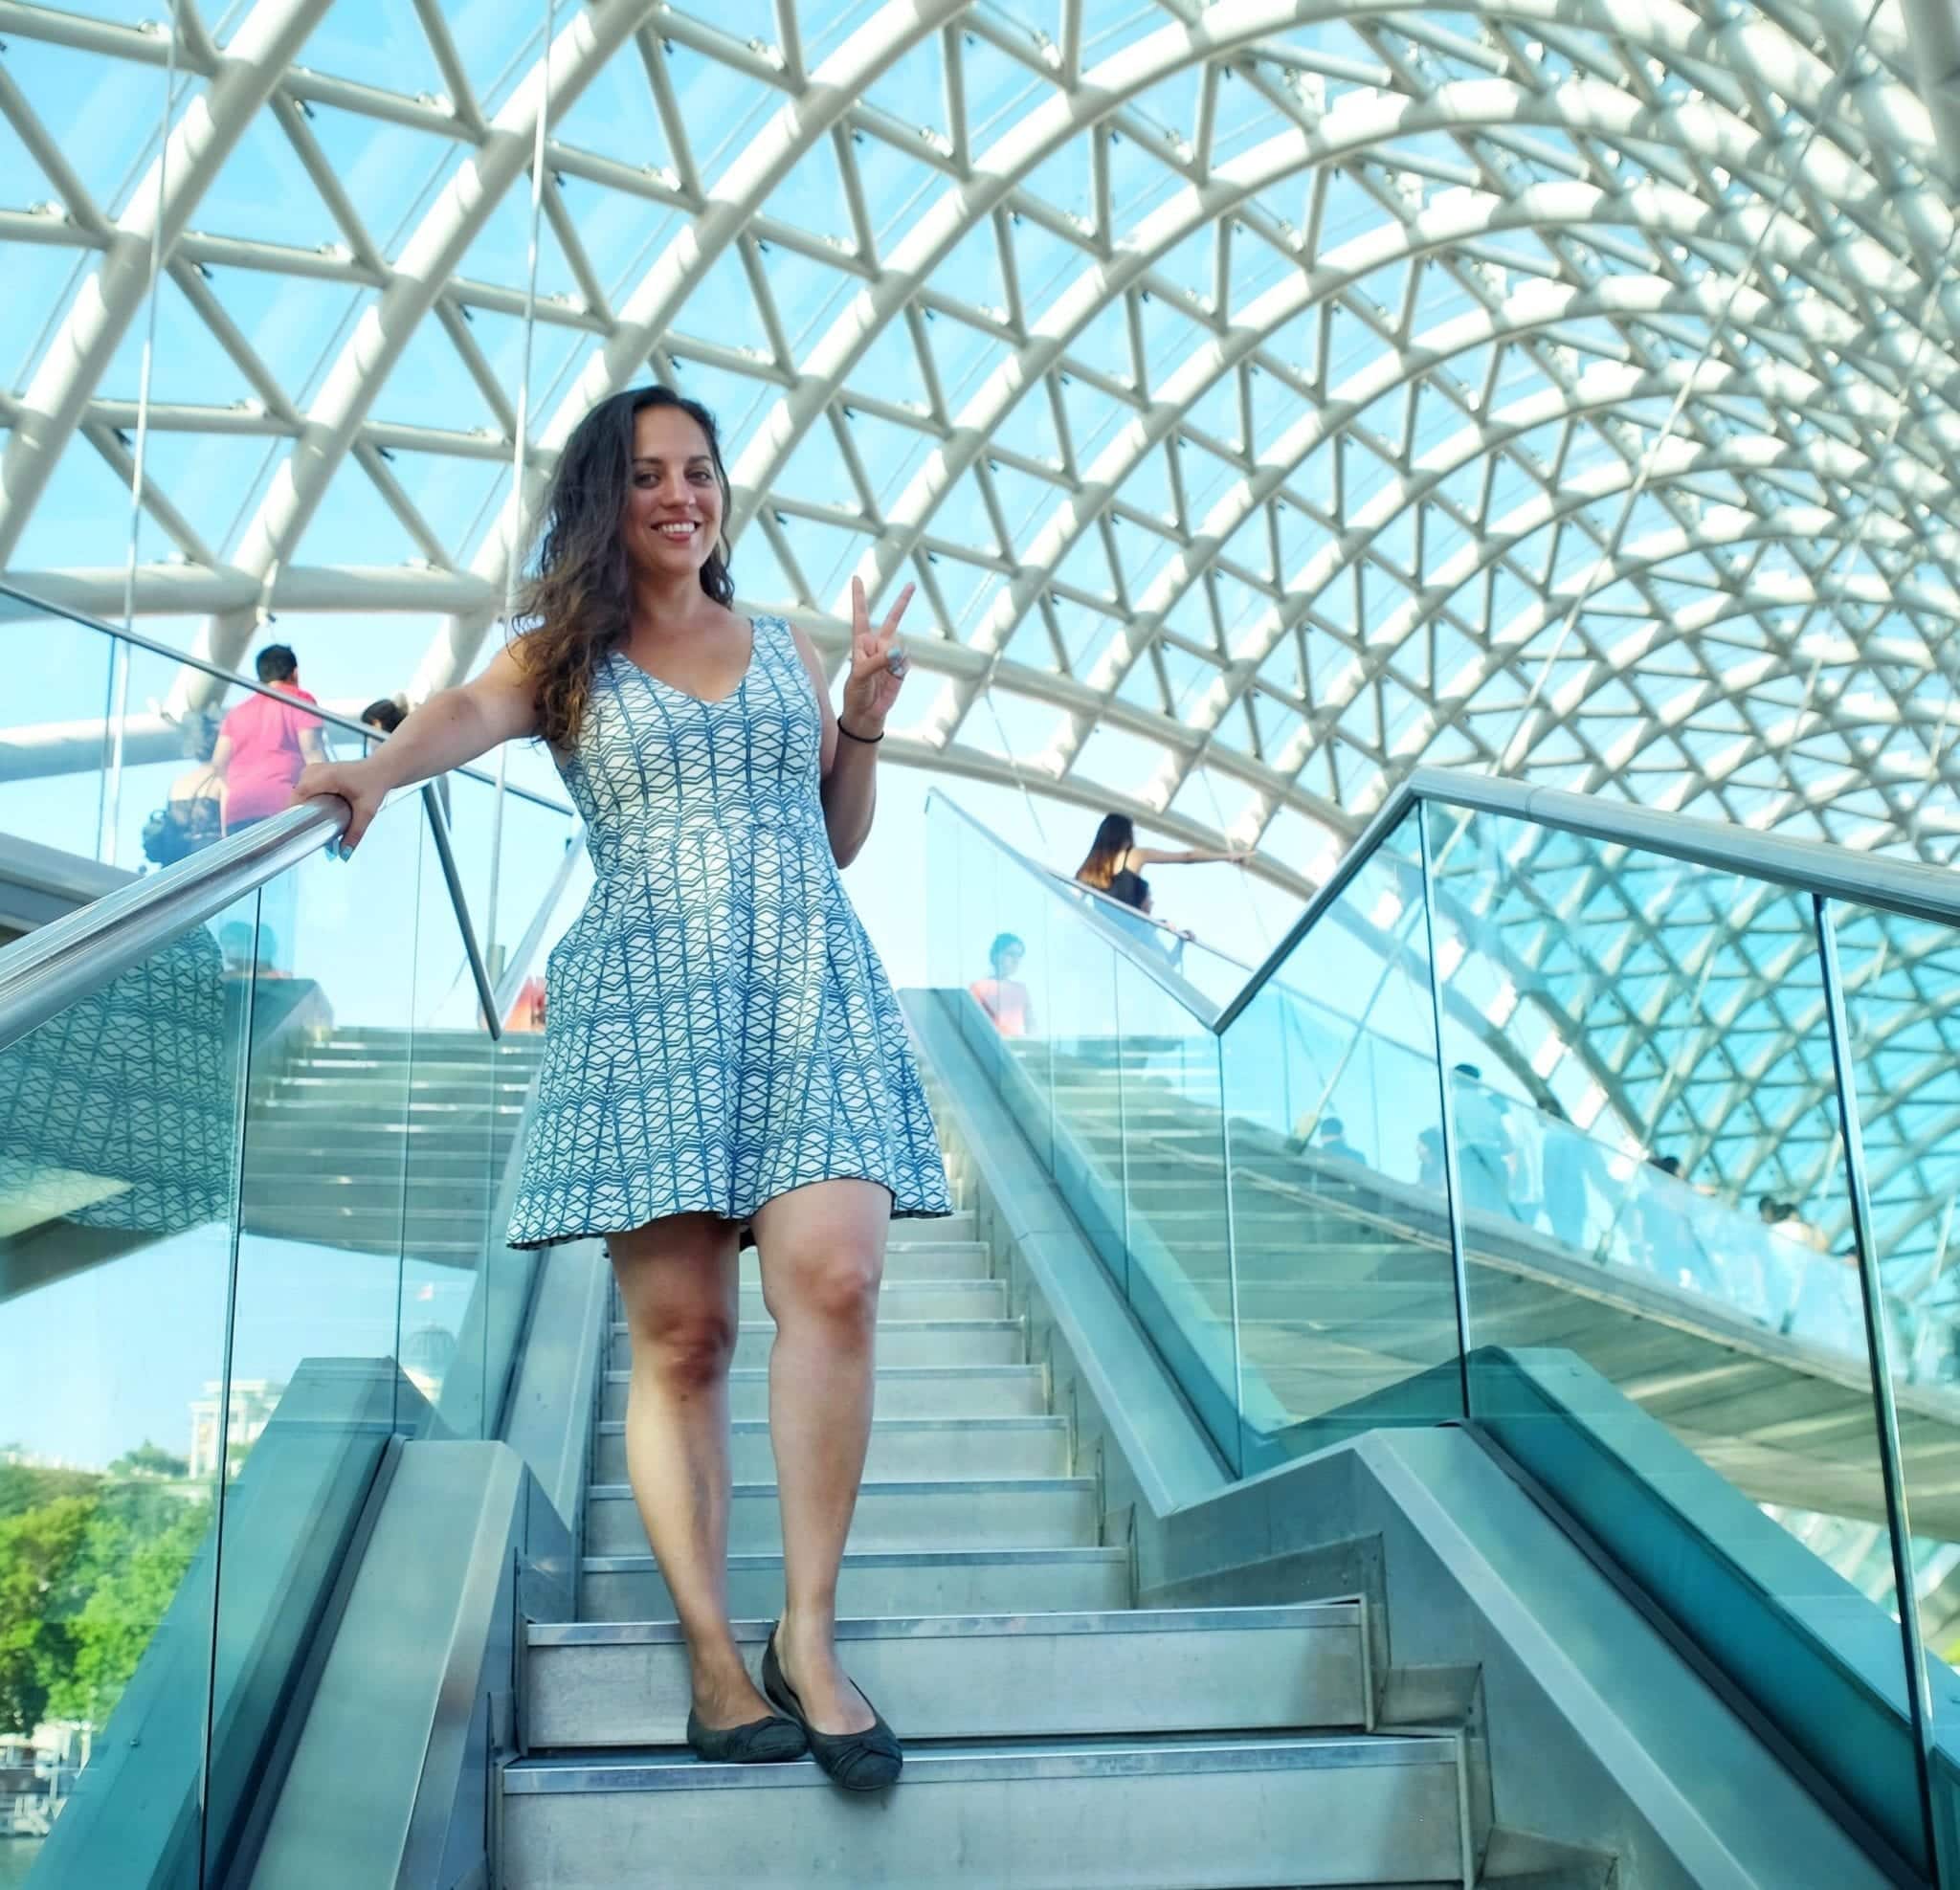 Kate stands underneath the green-and-white-patterned Peace Bridge in Tbilisi, Georgia, giving a peace sign and wearing a dress that has a very similar green and white geometric pattern.